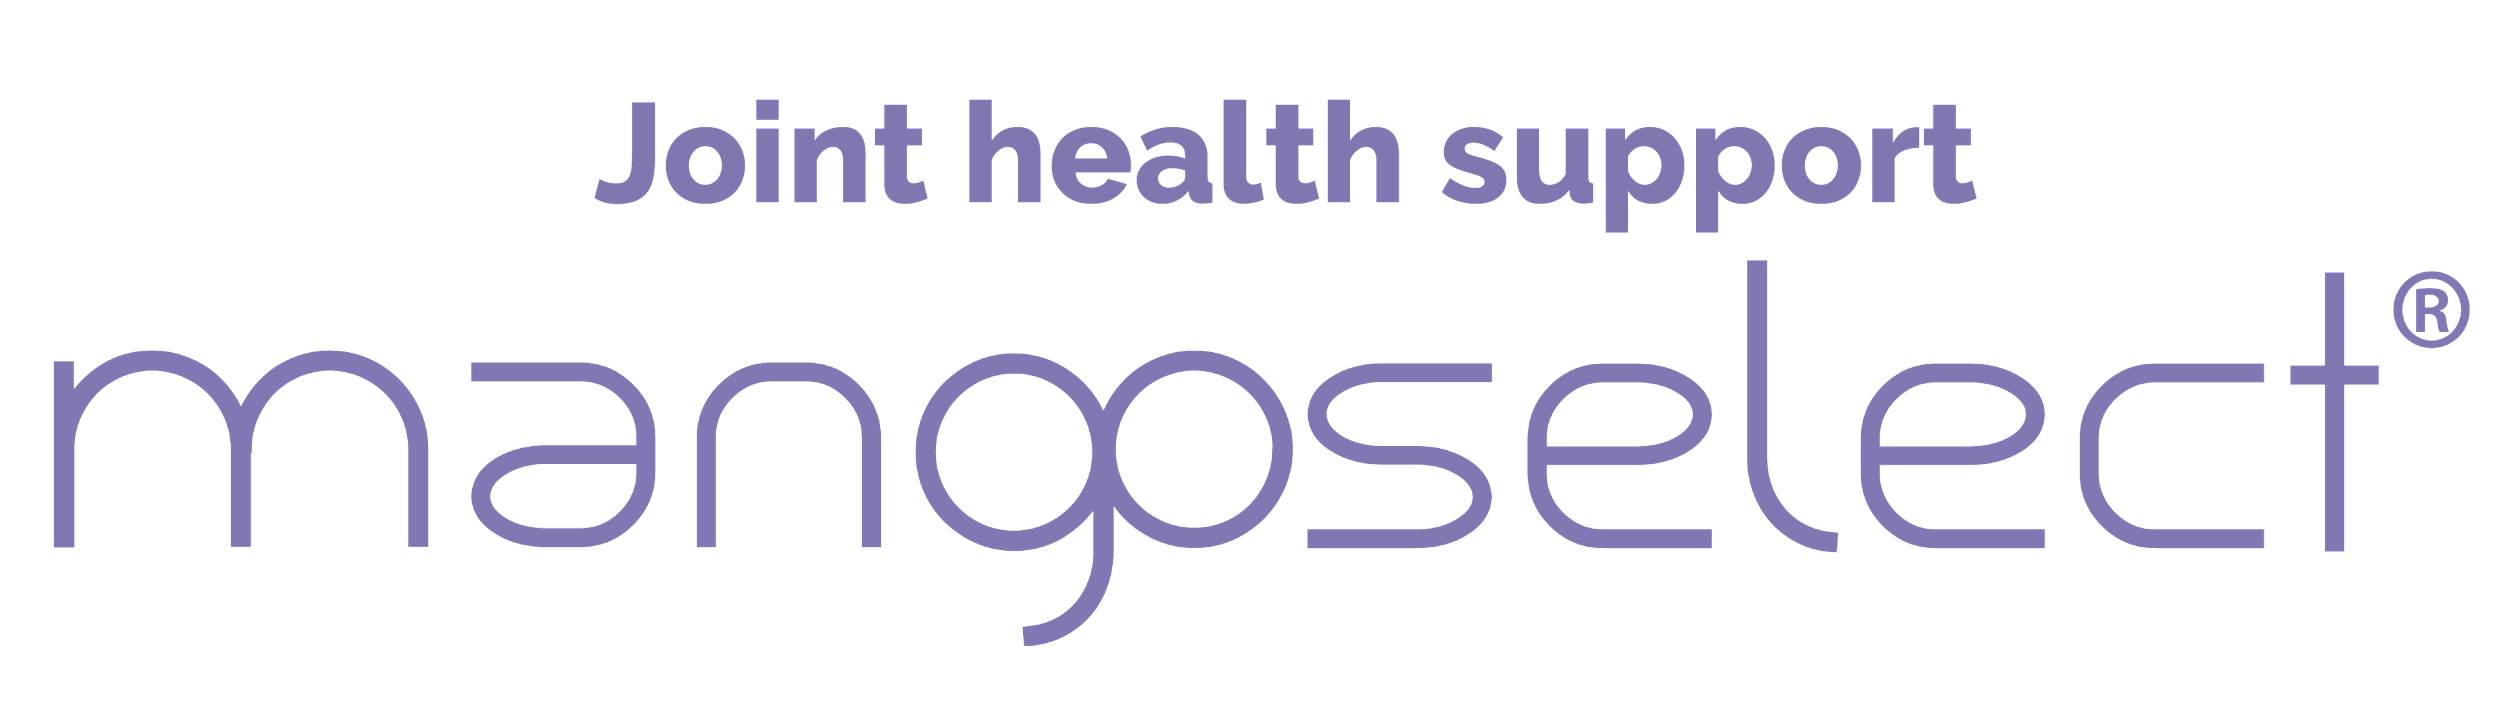 Joint health support